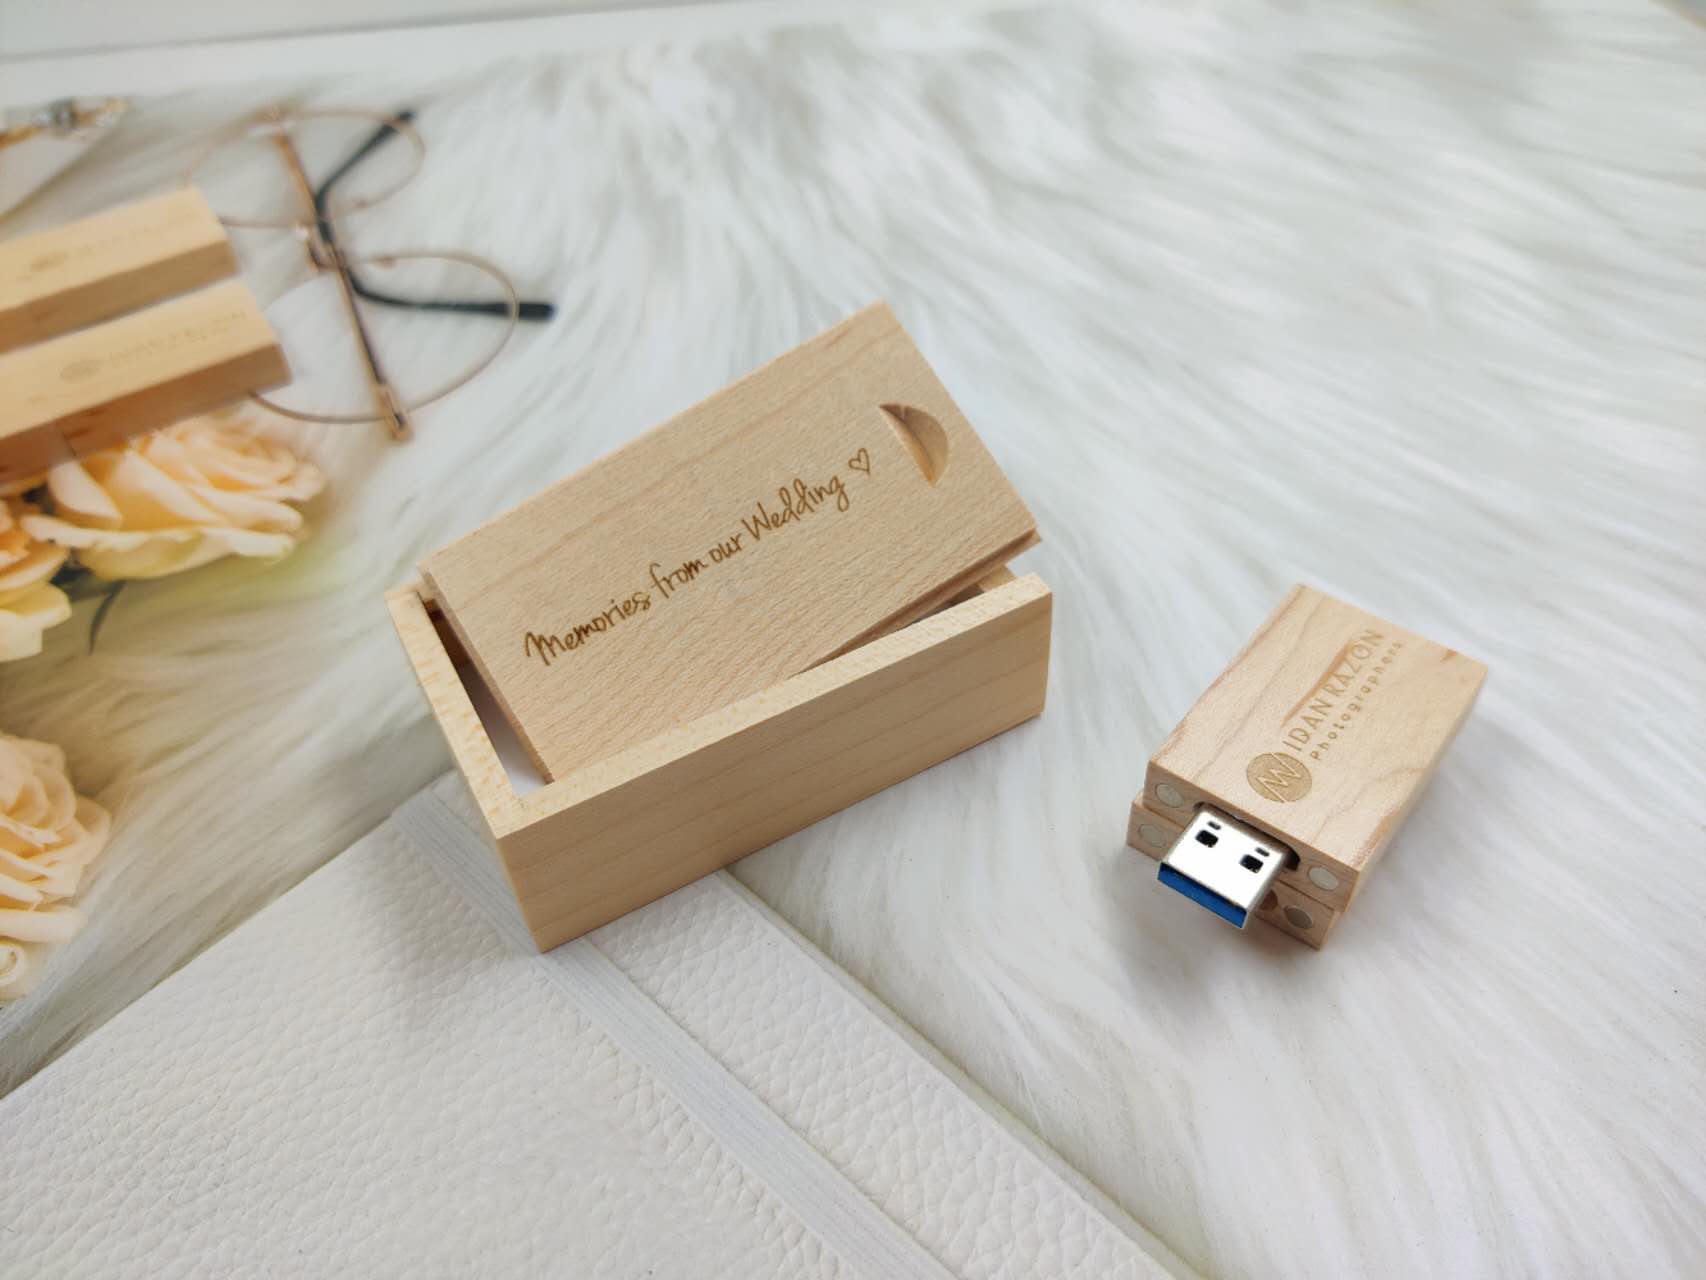 Classic vintage wooden style USB drives order again in August, do you have any order purchase plan ?